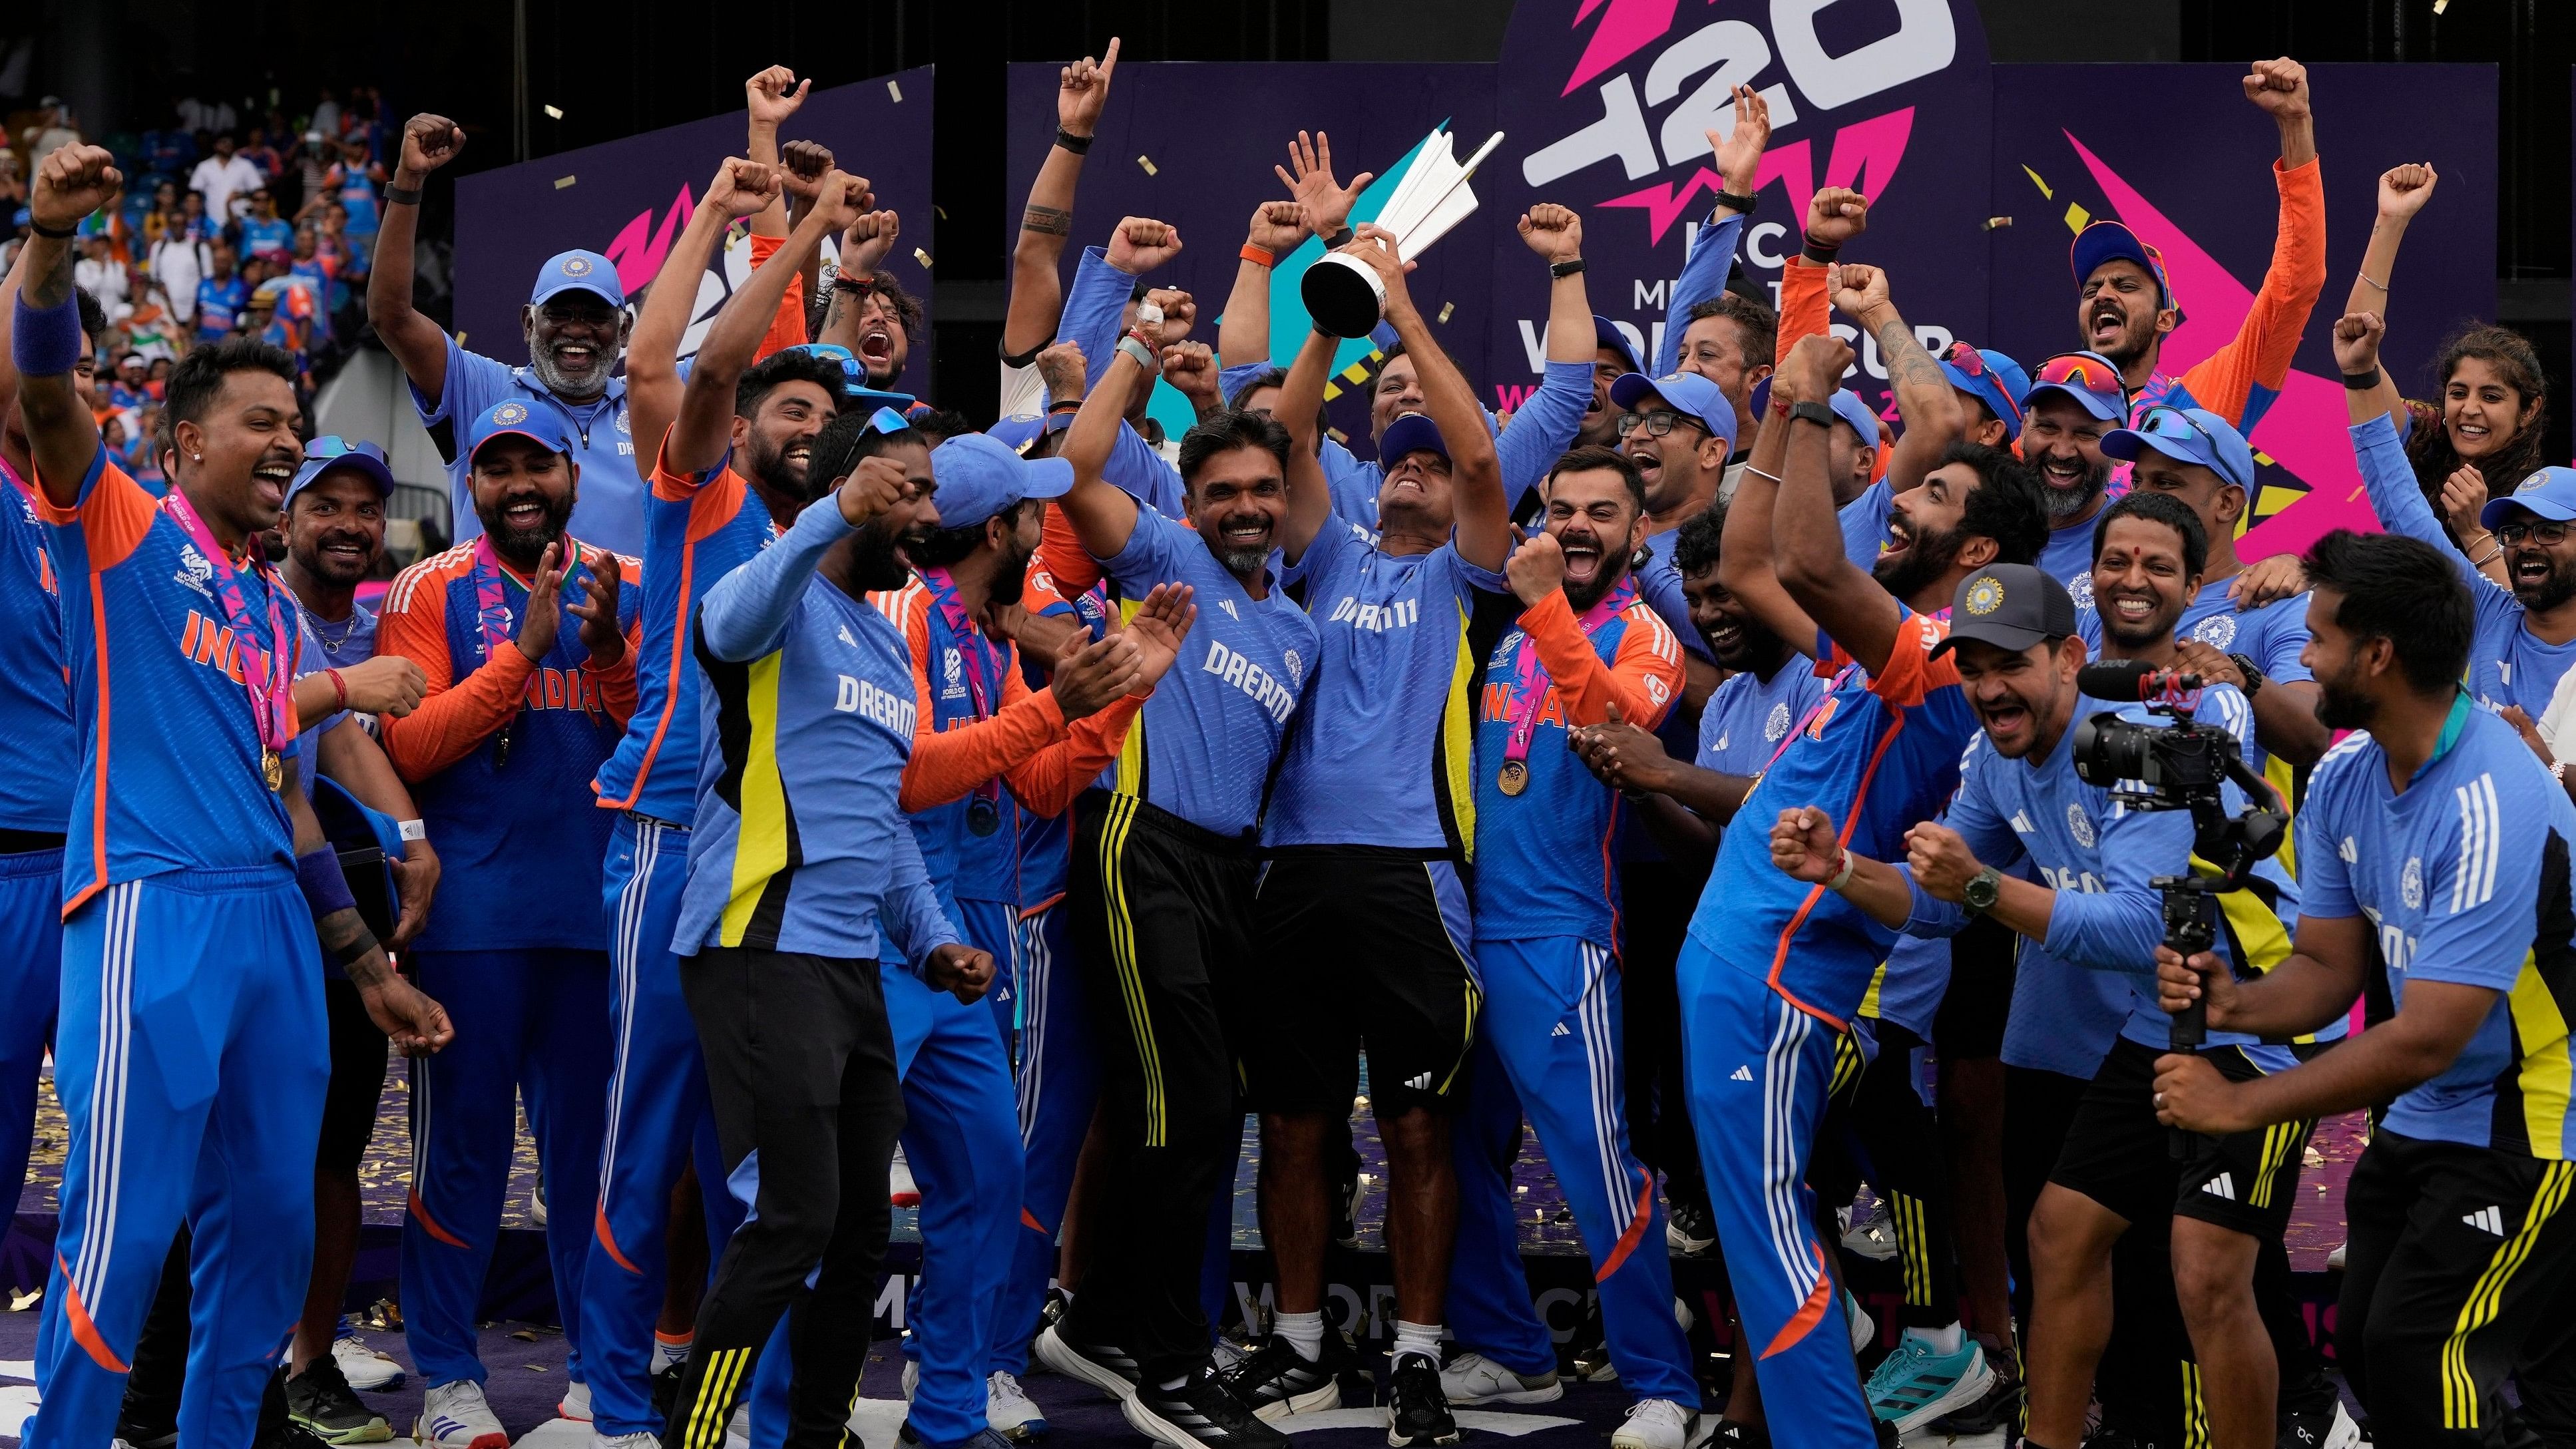 <div class="paragraphs"><p>India's head coach Rahul Dravid (centre) lifts the trophy as players celebrate winning the T20 World Cup after beating South Africa in the final on Saturday.</p></div>